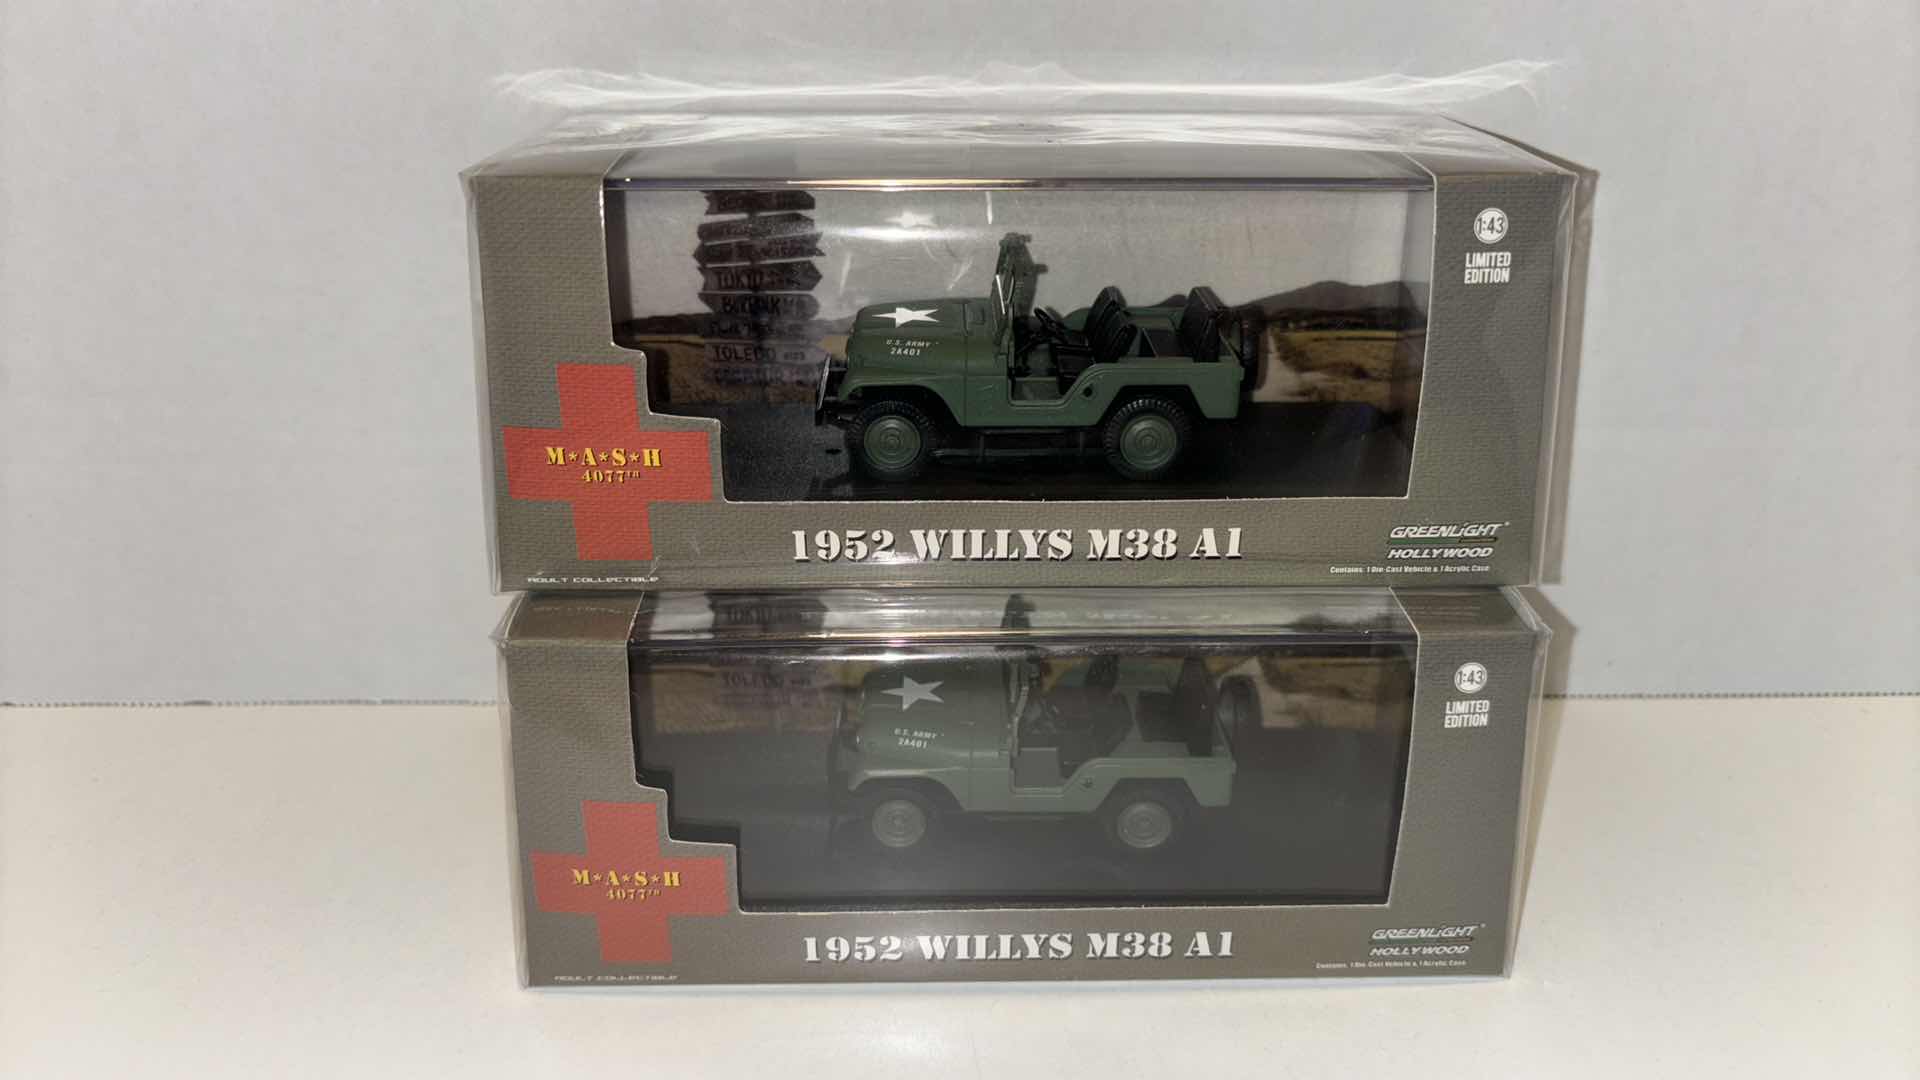 Photo 1 of NEW GREENLIGHT COLLECTIBLES HOLLYWOOD 1:43 DIE-CAST VEHICLE, “MASH 4077TH 1952 WILLYS M38 A1 JEEP” 2-PACK